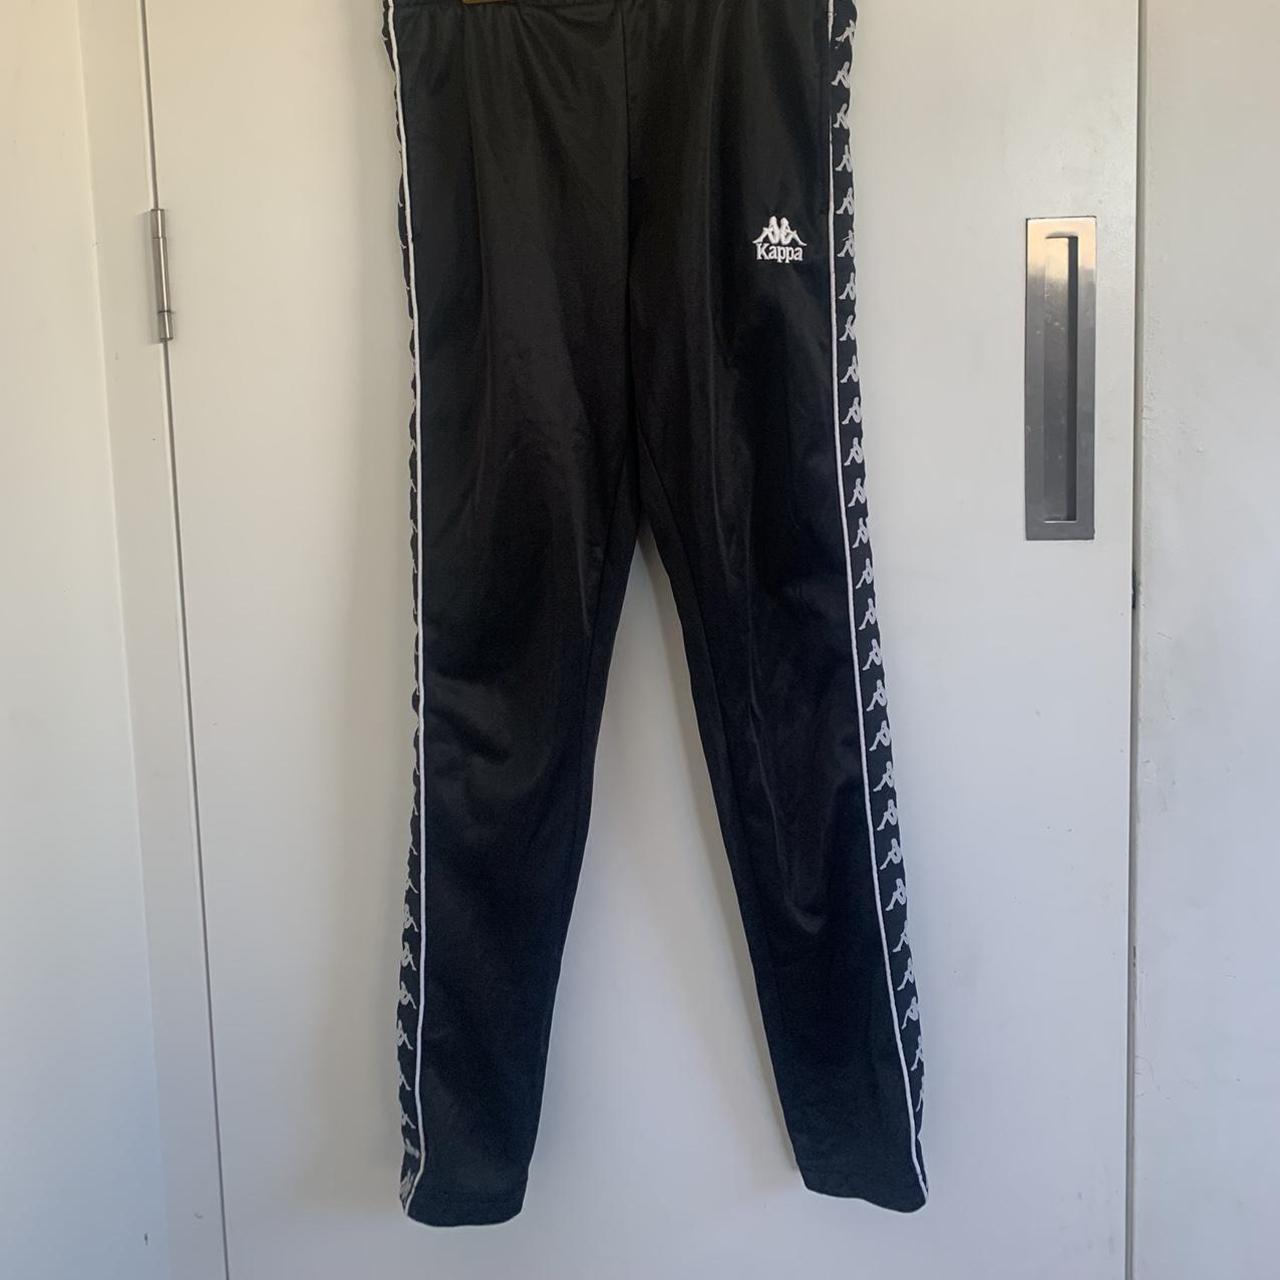 Kappa 1/4 button up track pants. Fits tight on a small - Depop